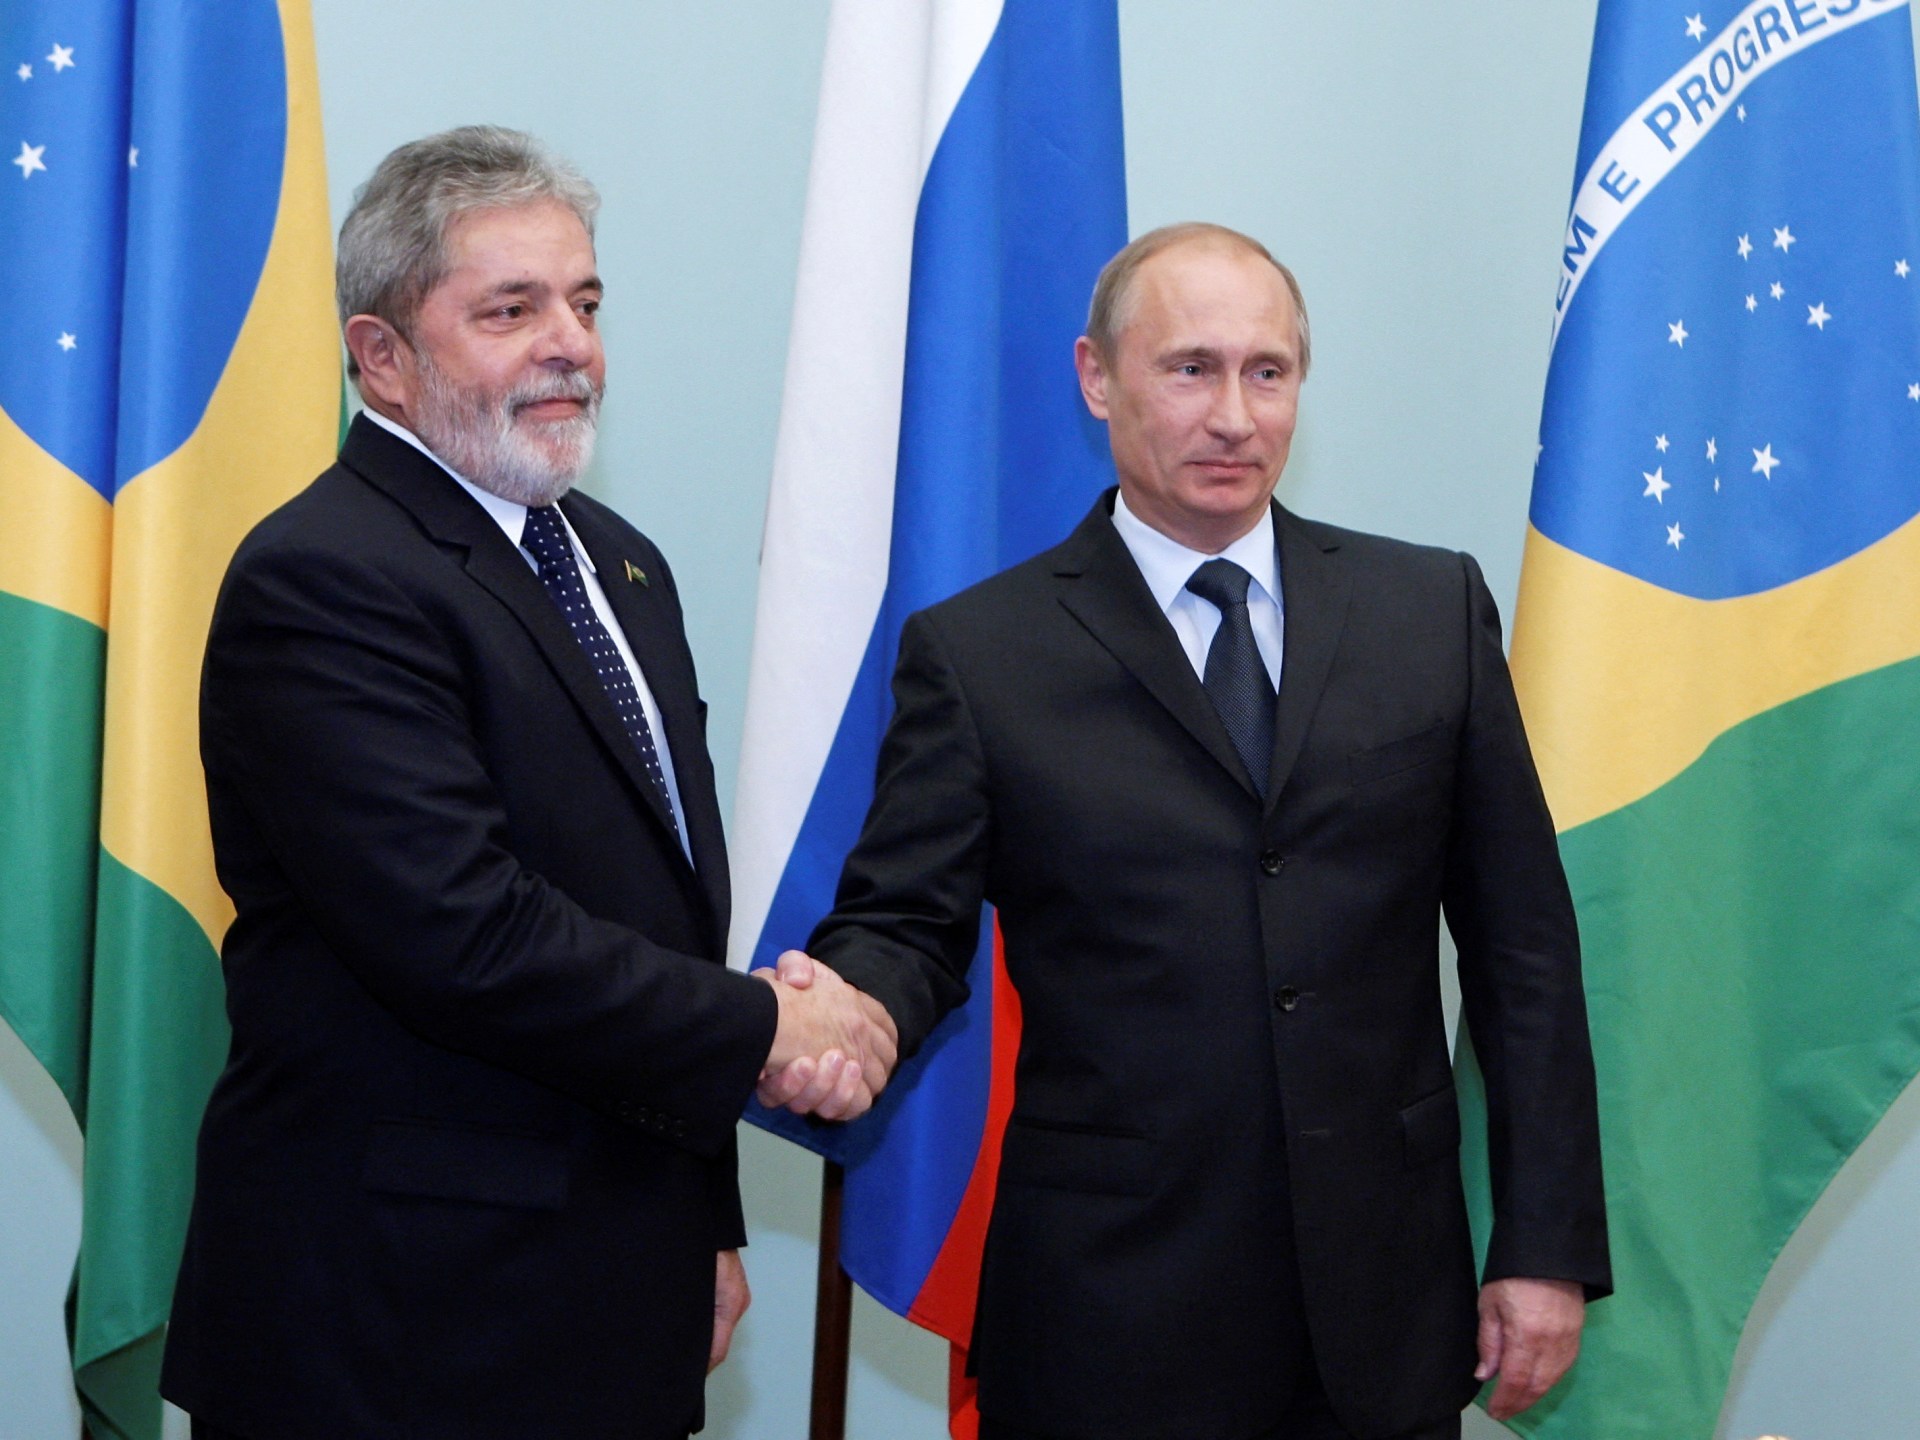 Lula says Putin will not be arrested at Brazil G20 meeting